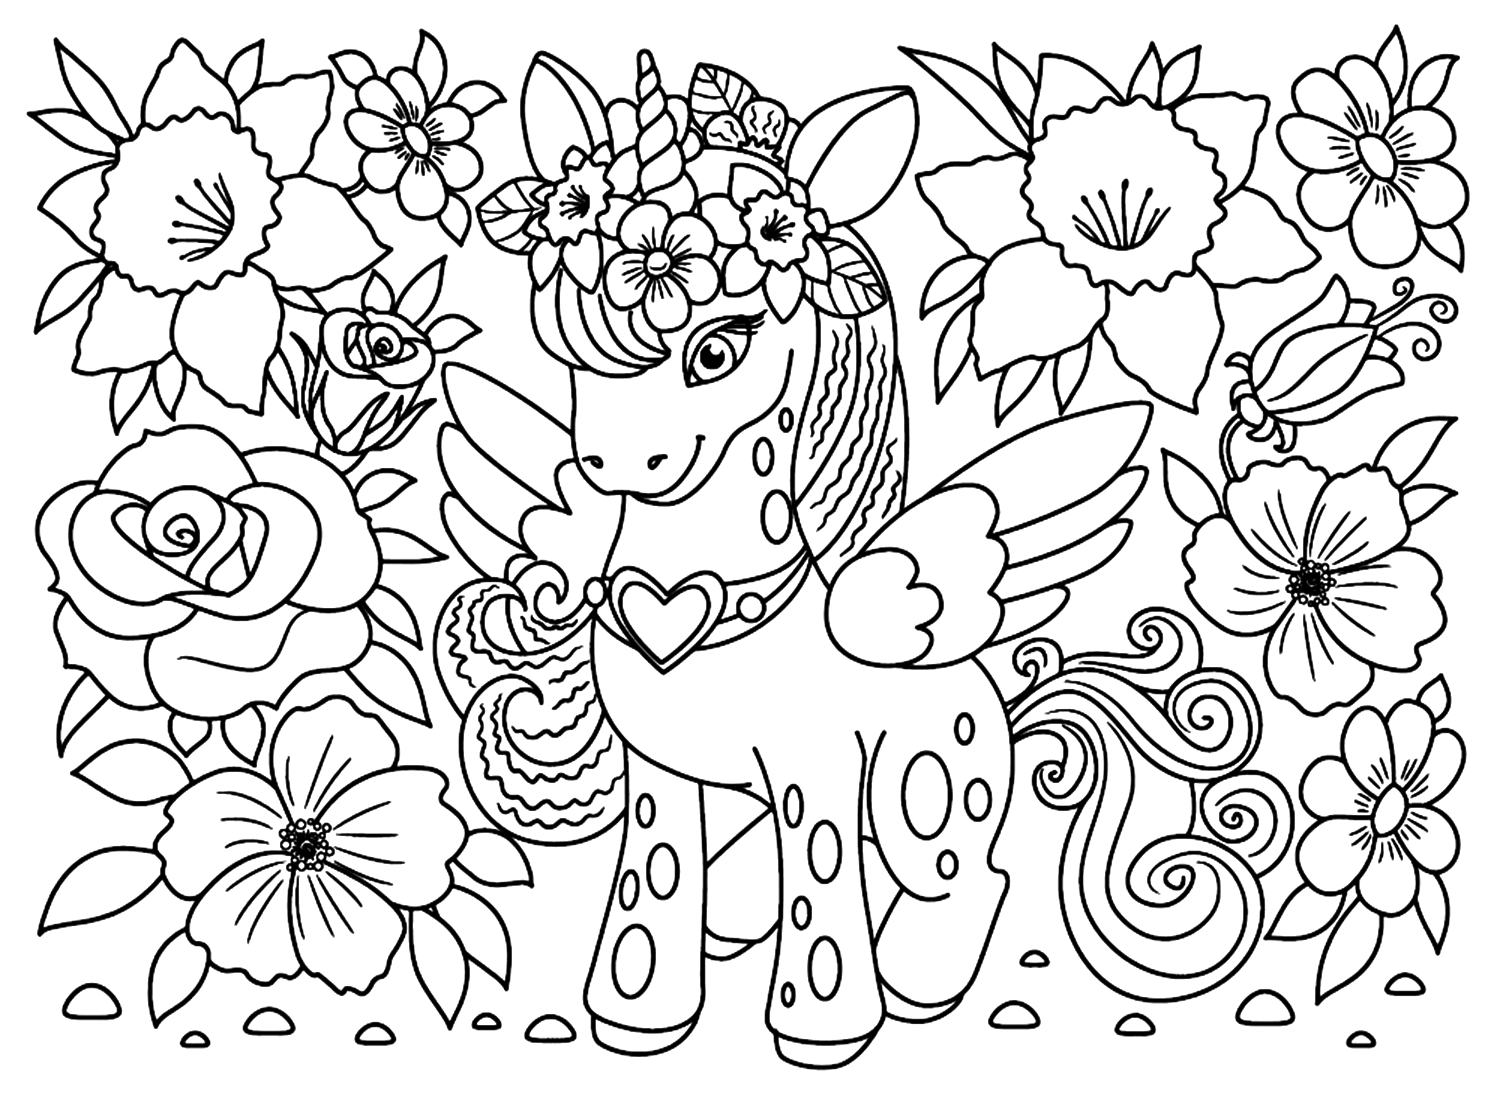 Unicorn Among Flowers And Plants Coloring Page